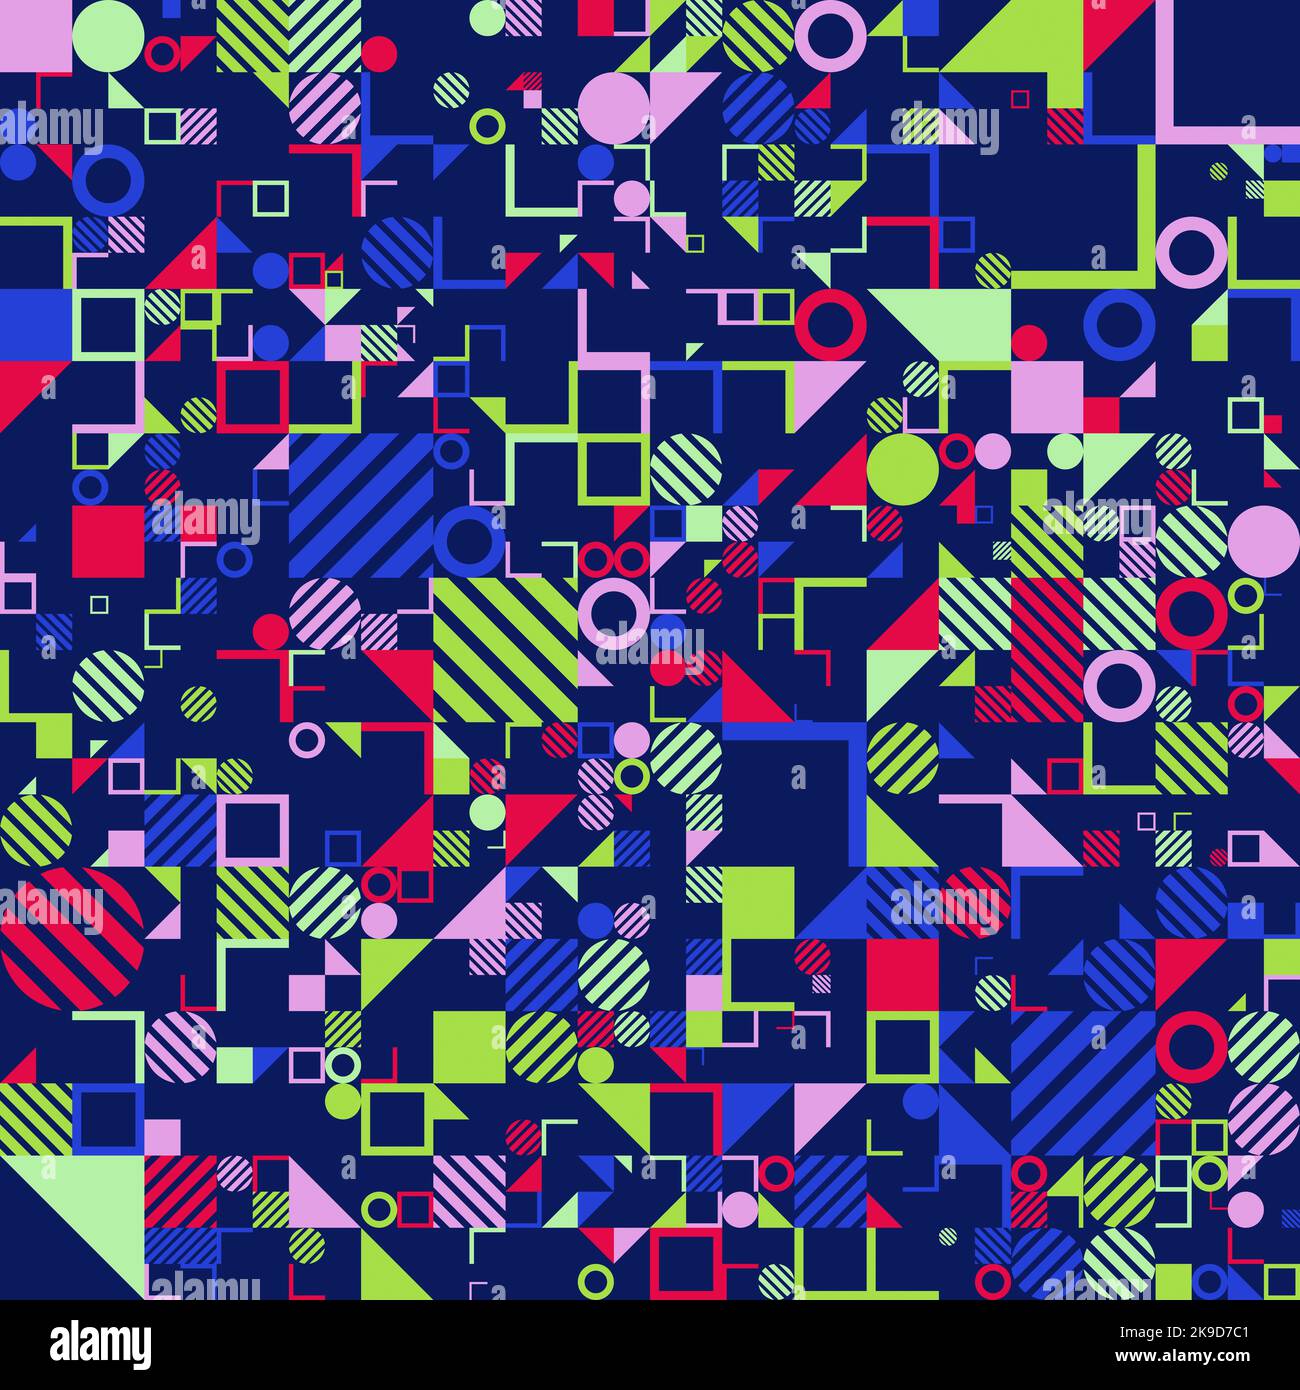 Bright colored small shapes seamless pattern.Attractive modern pattern. Squares, lines, grids, triangles, L shapes and circles of different strong col Stock Photo